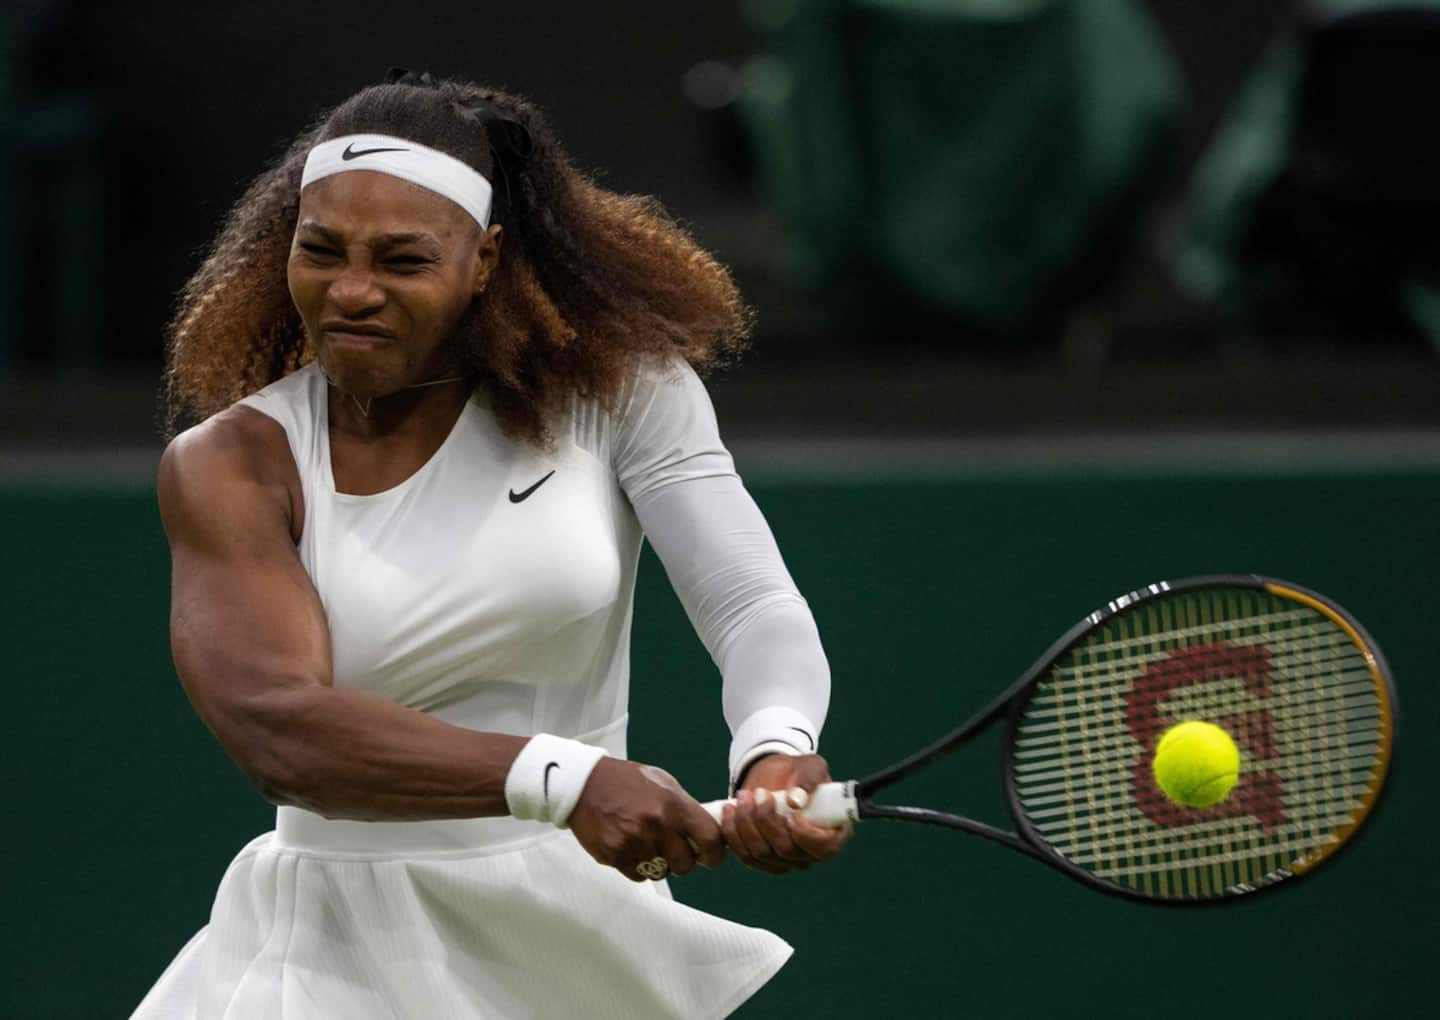 Serena Williams gives “appointment” to Wimbledon for her return